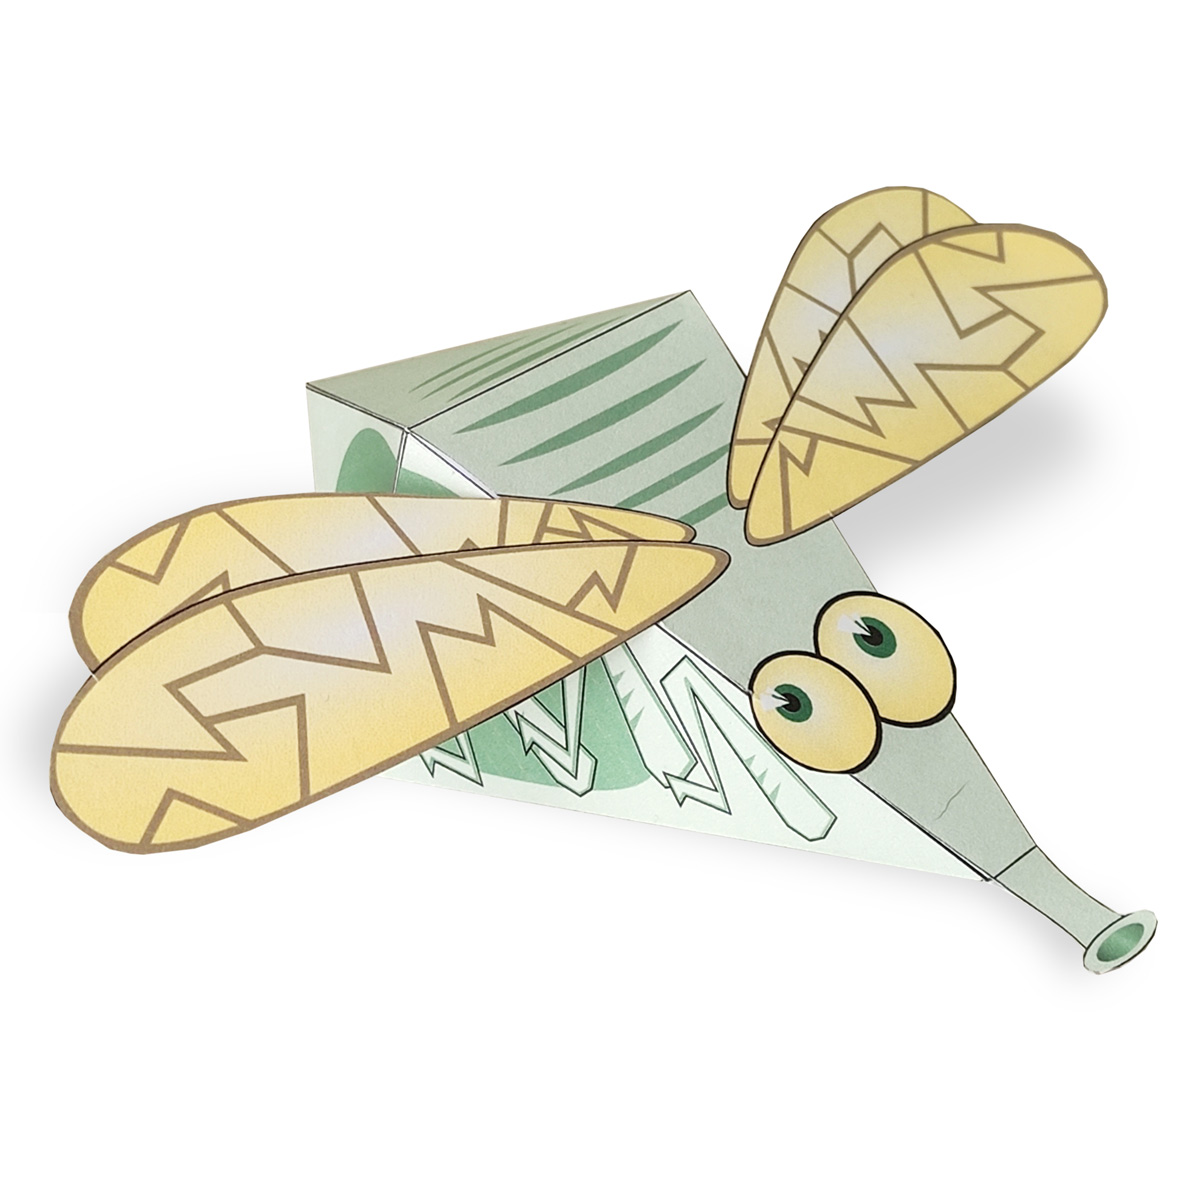 Mosquito free printable paper model